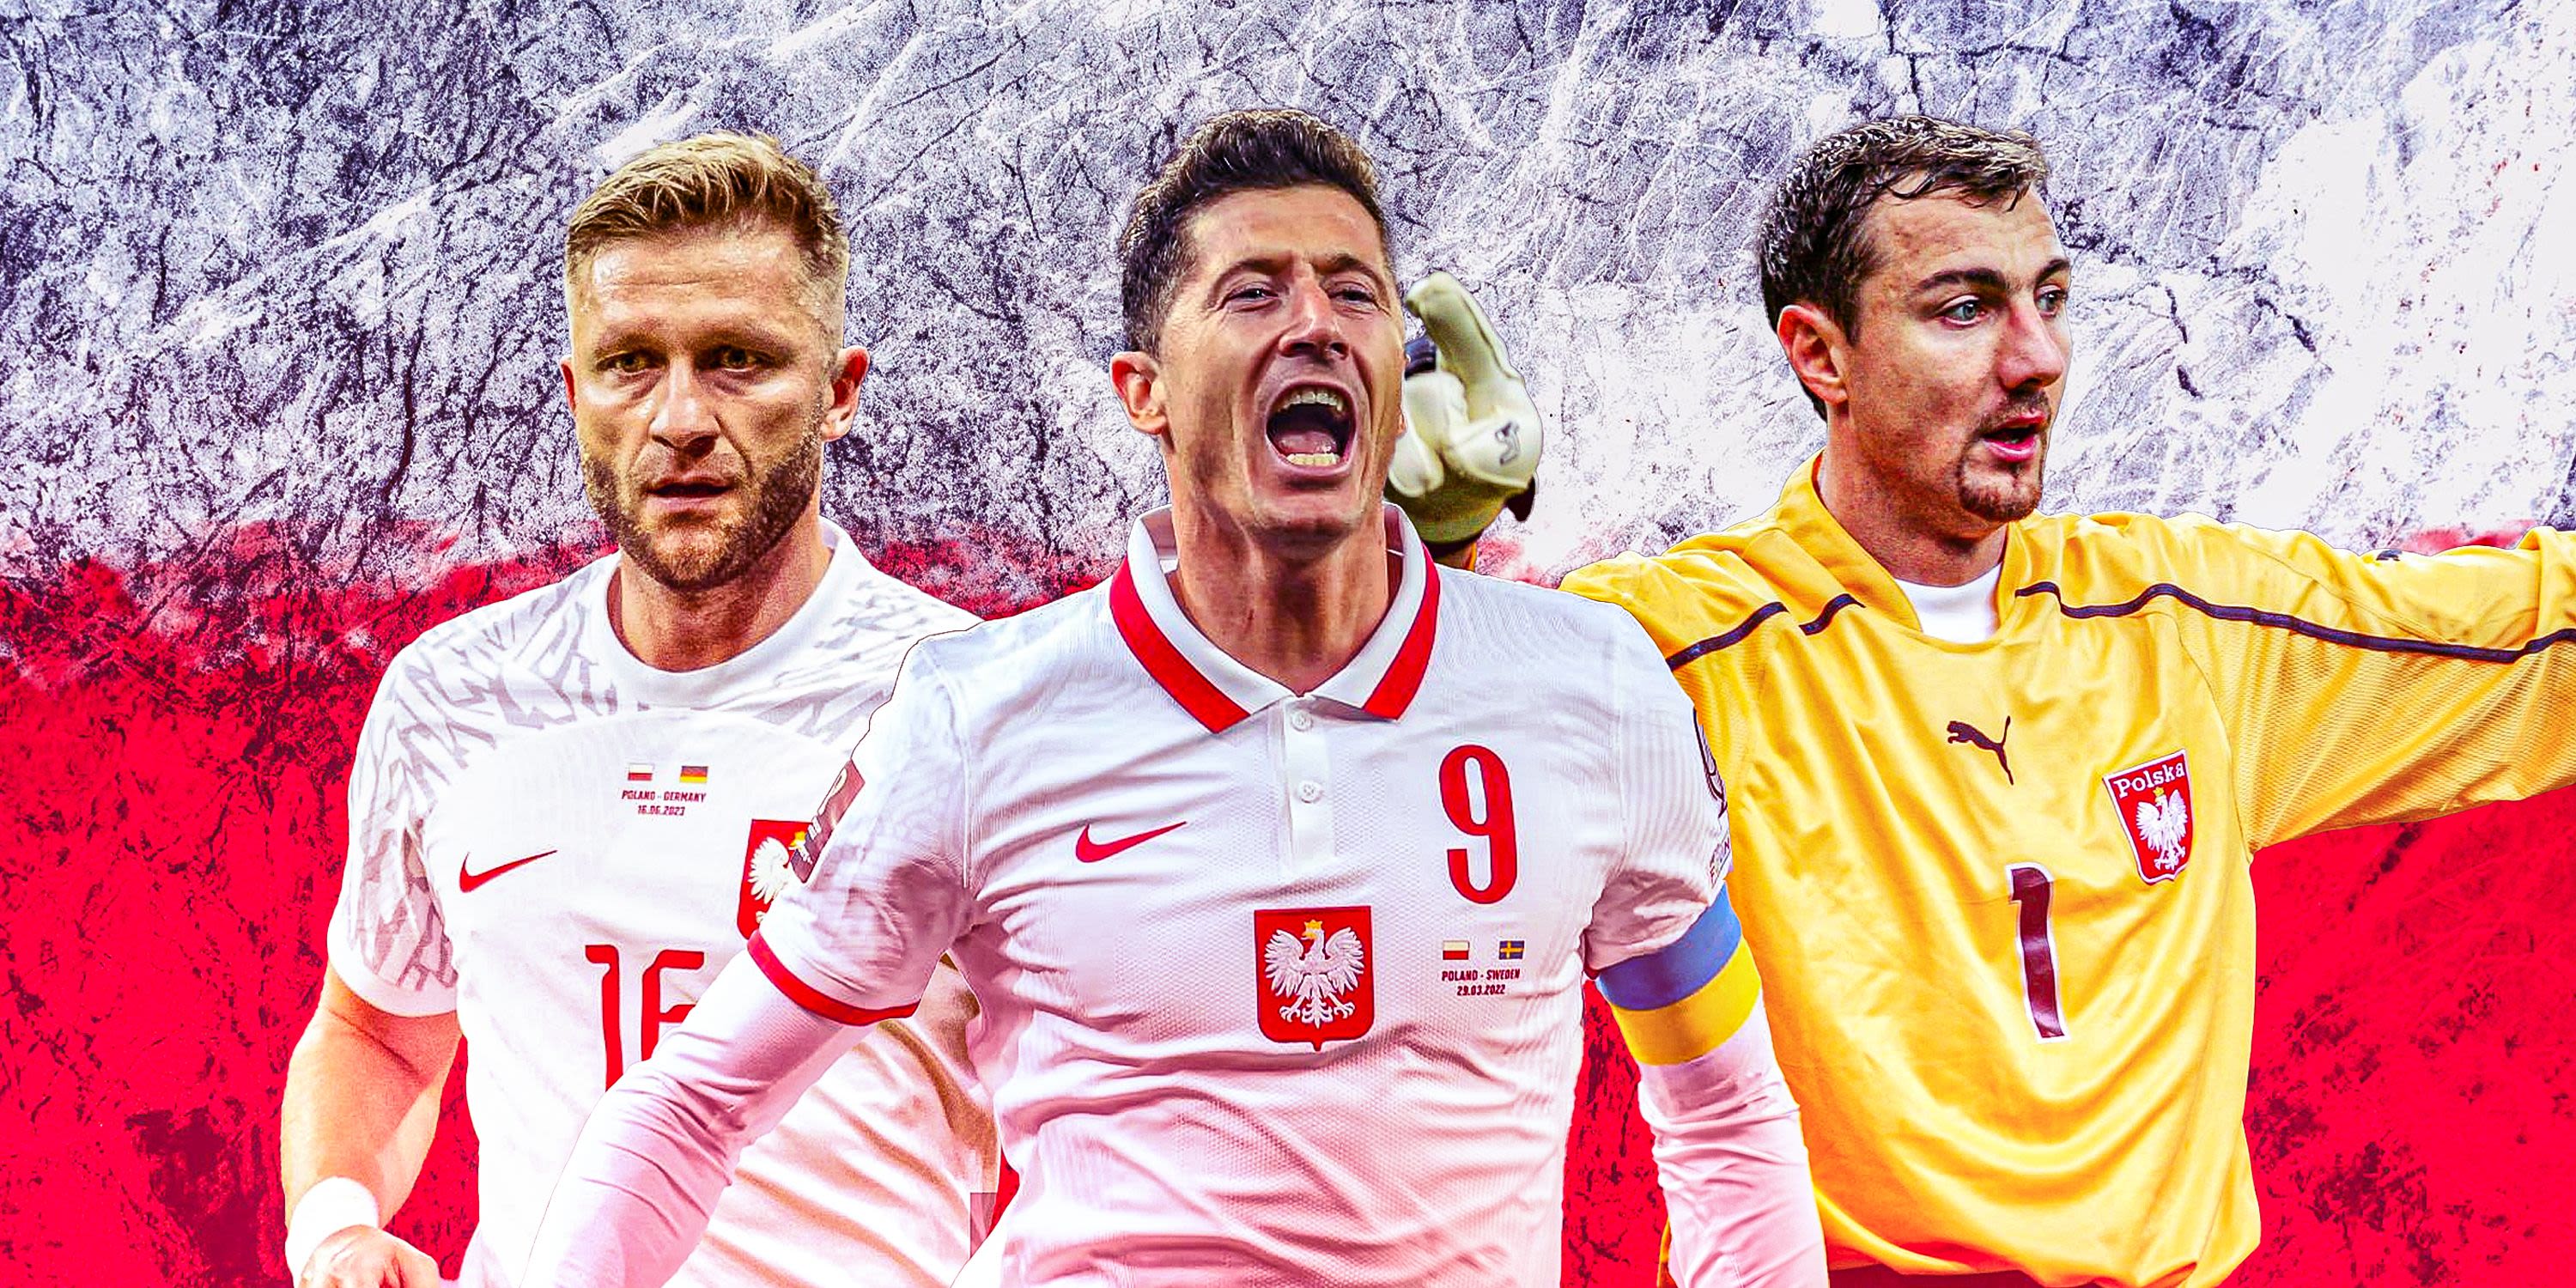 The greatest Poland players in history have been ranked